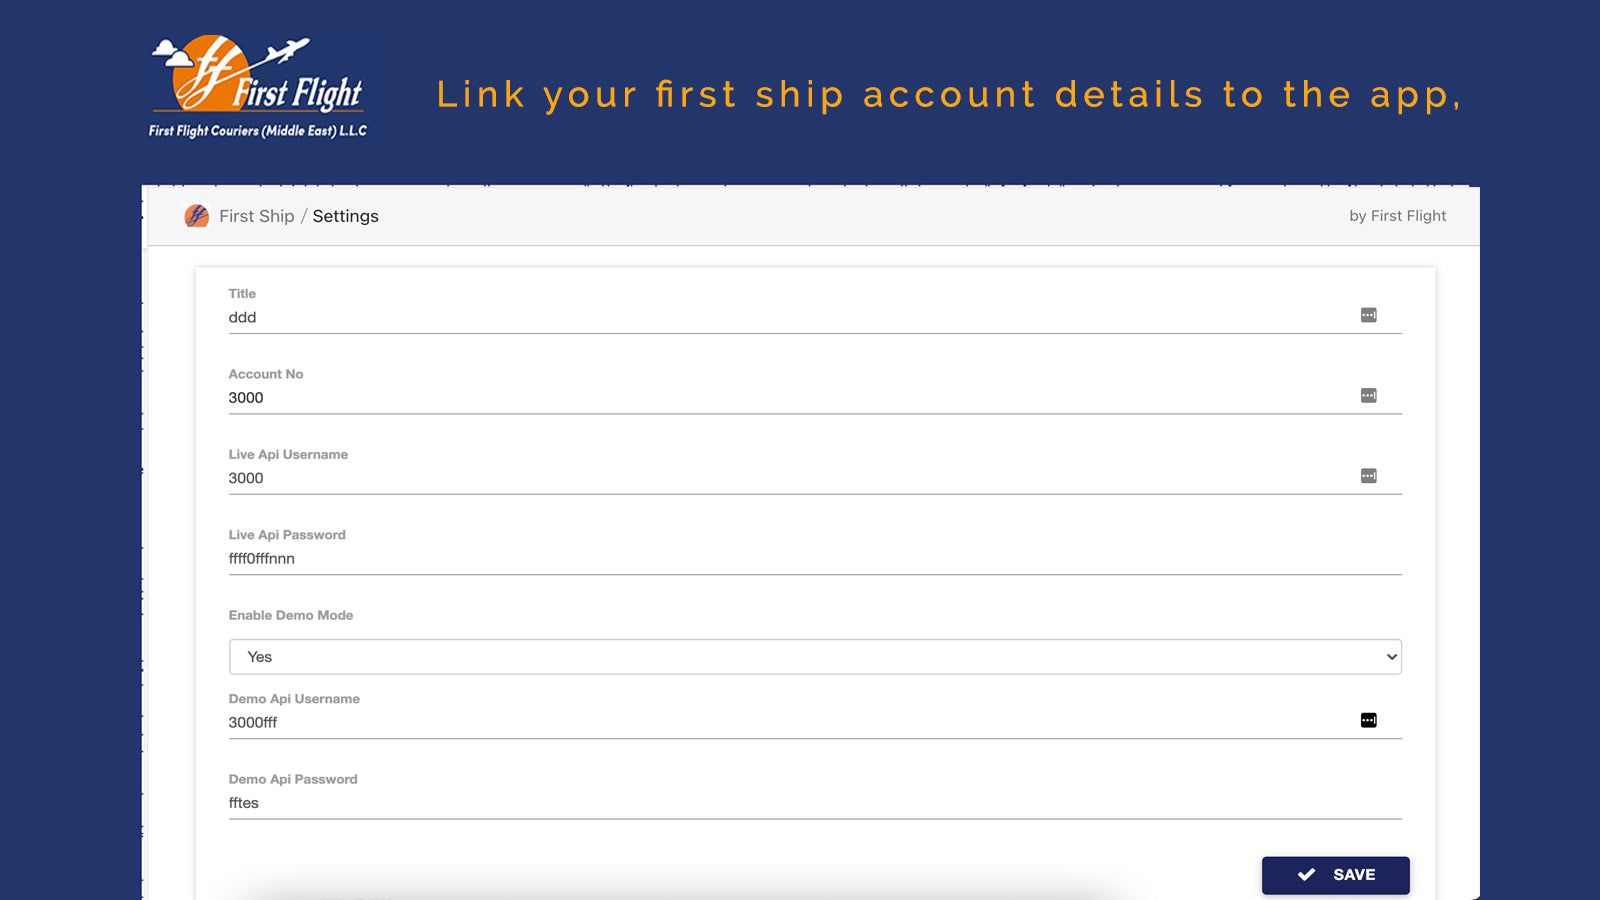 Link your first ship account details to the app